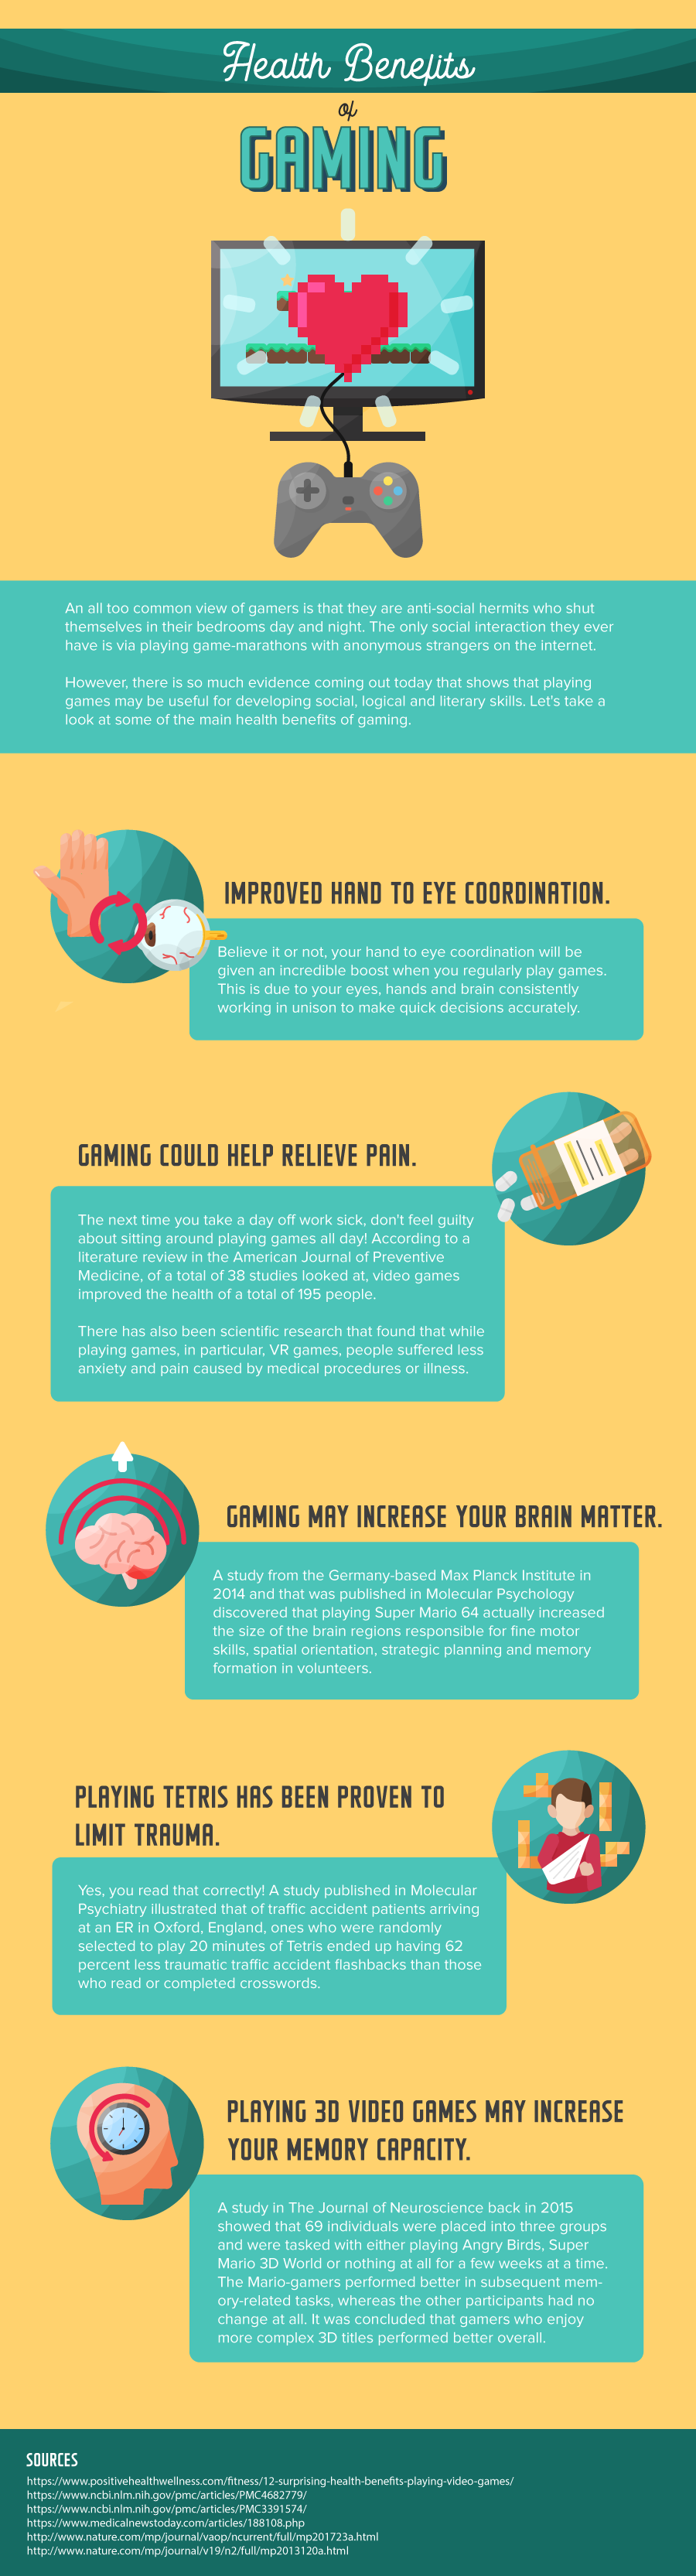 How Online Game Benefits You?